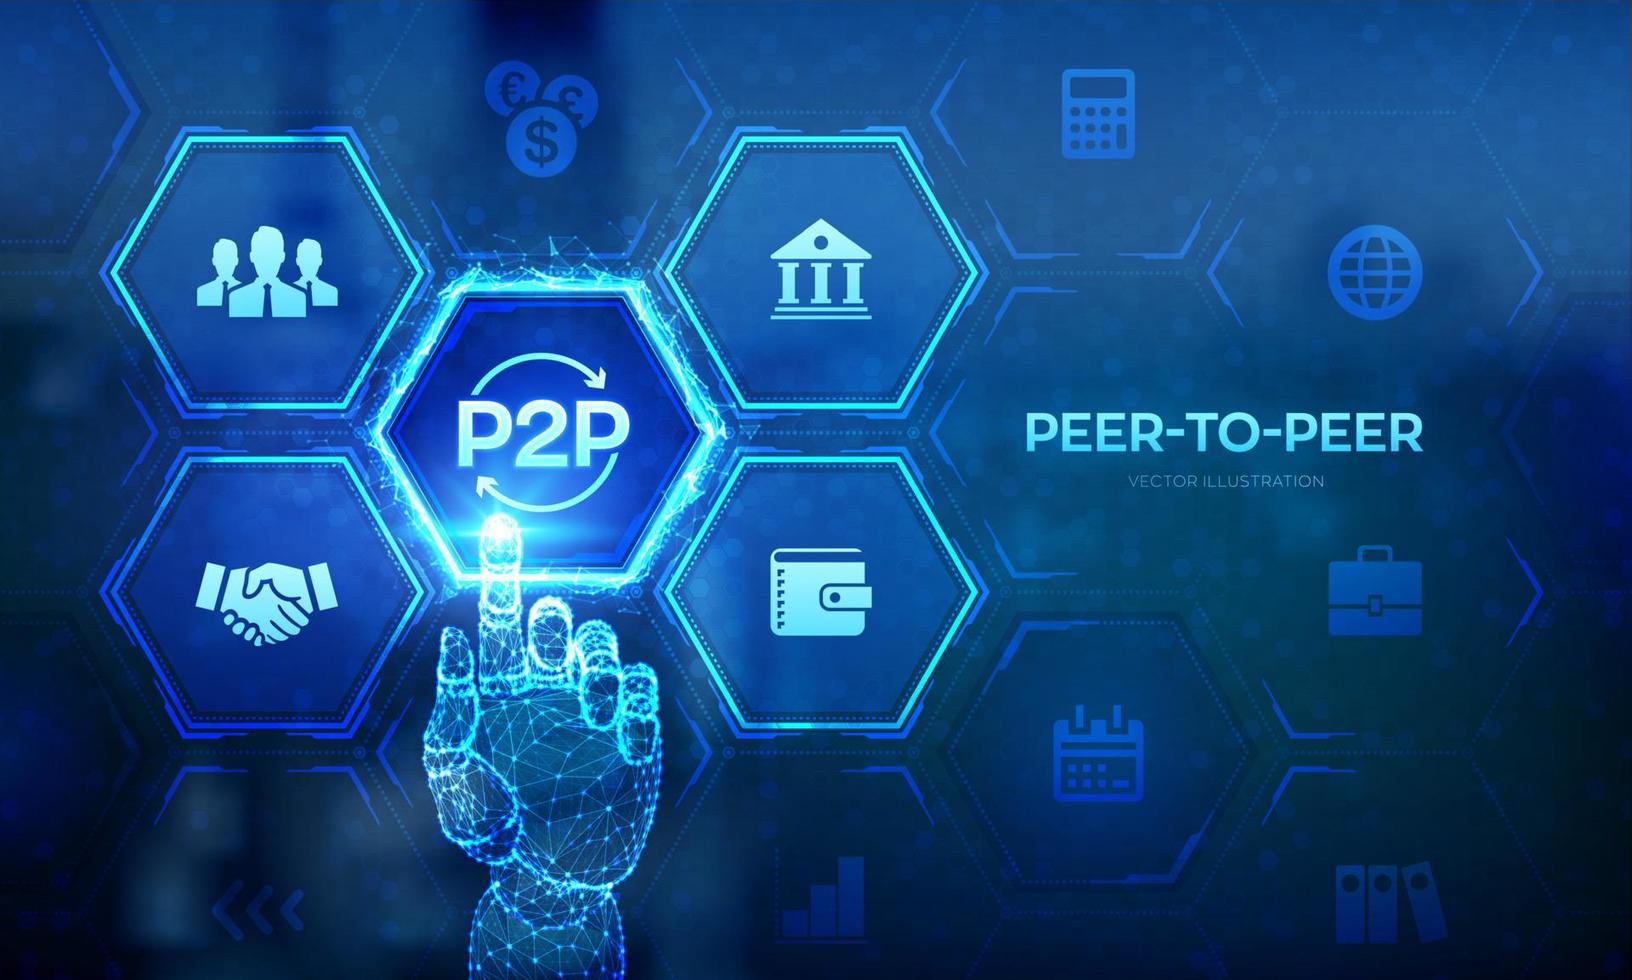 Peer to peer. P2P payment and online model for support or transfer money. Peer-To-Peer technology concept on virtual screen. Robotic hand touching digital interface. Vector illustration.